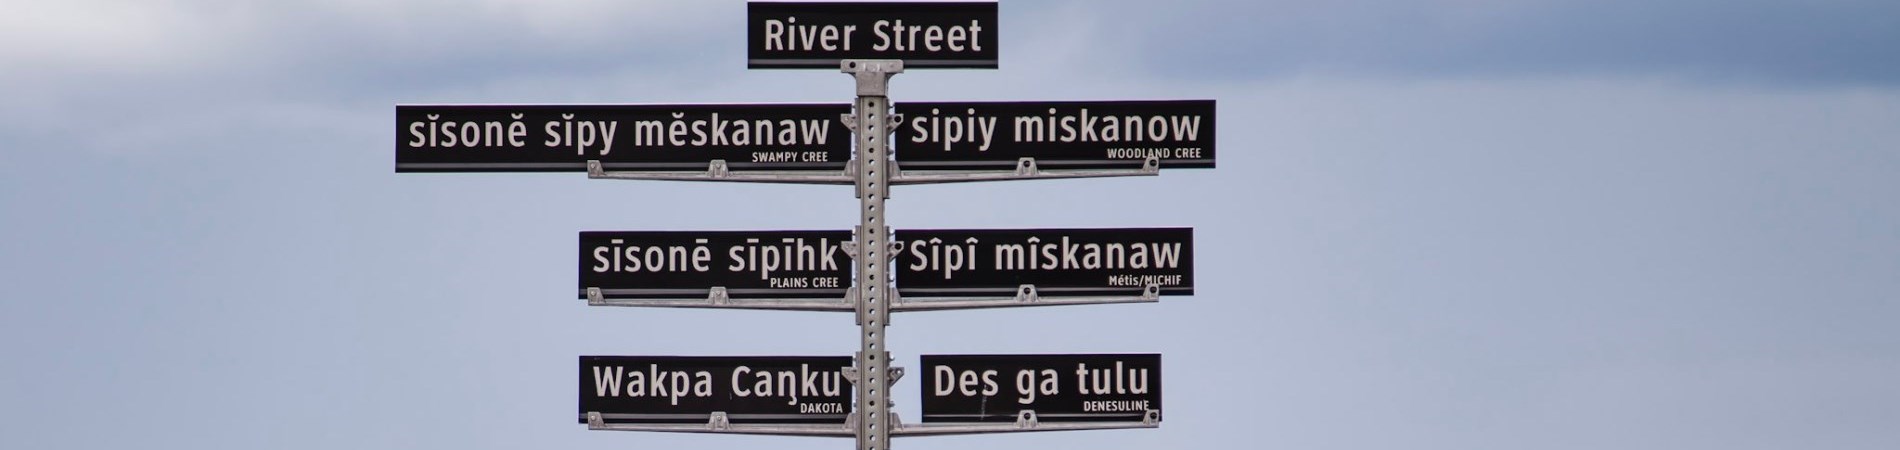 River Street Signs in Indigenous Languages